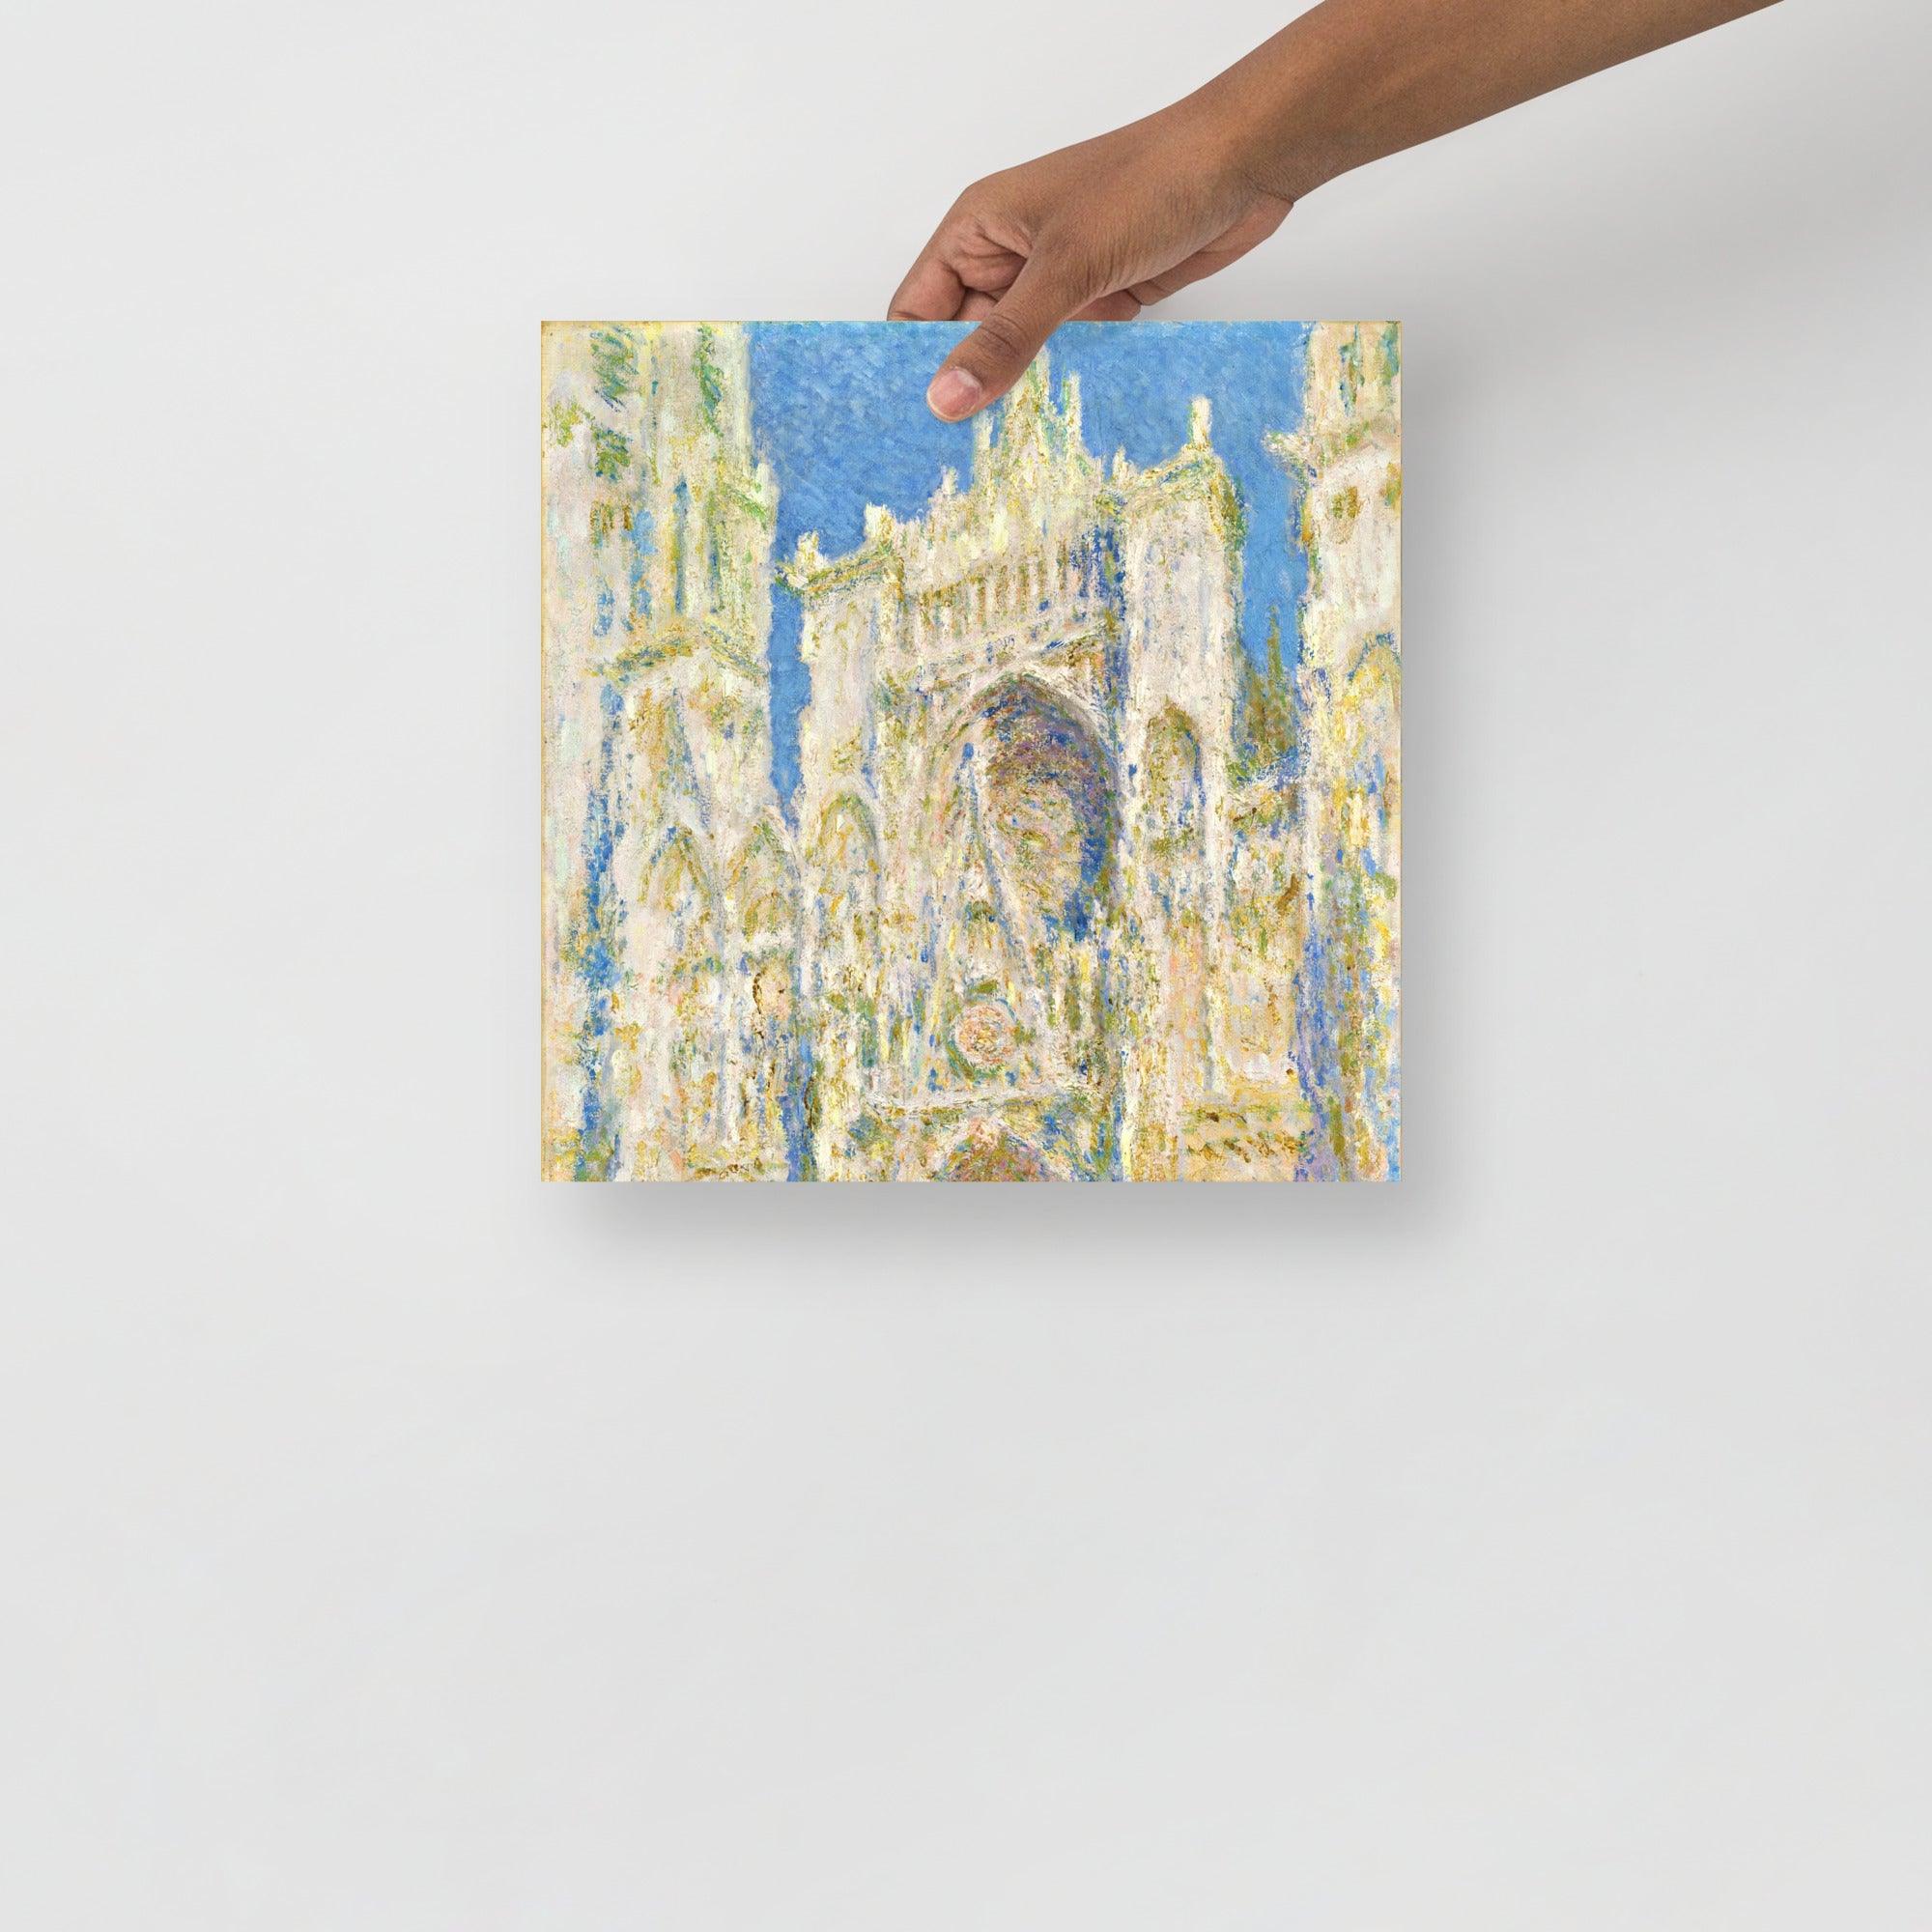 A Rouen Cathedral, West Facade by Claude Monet poster on a plain backdrop in size 12x12”.